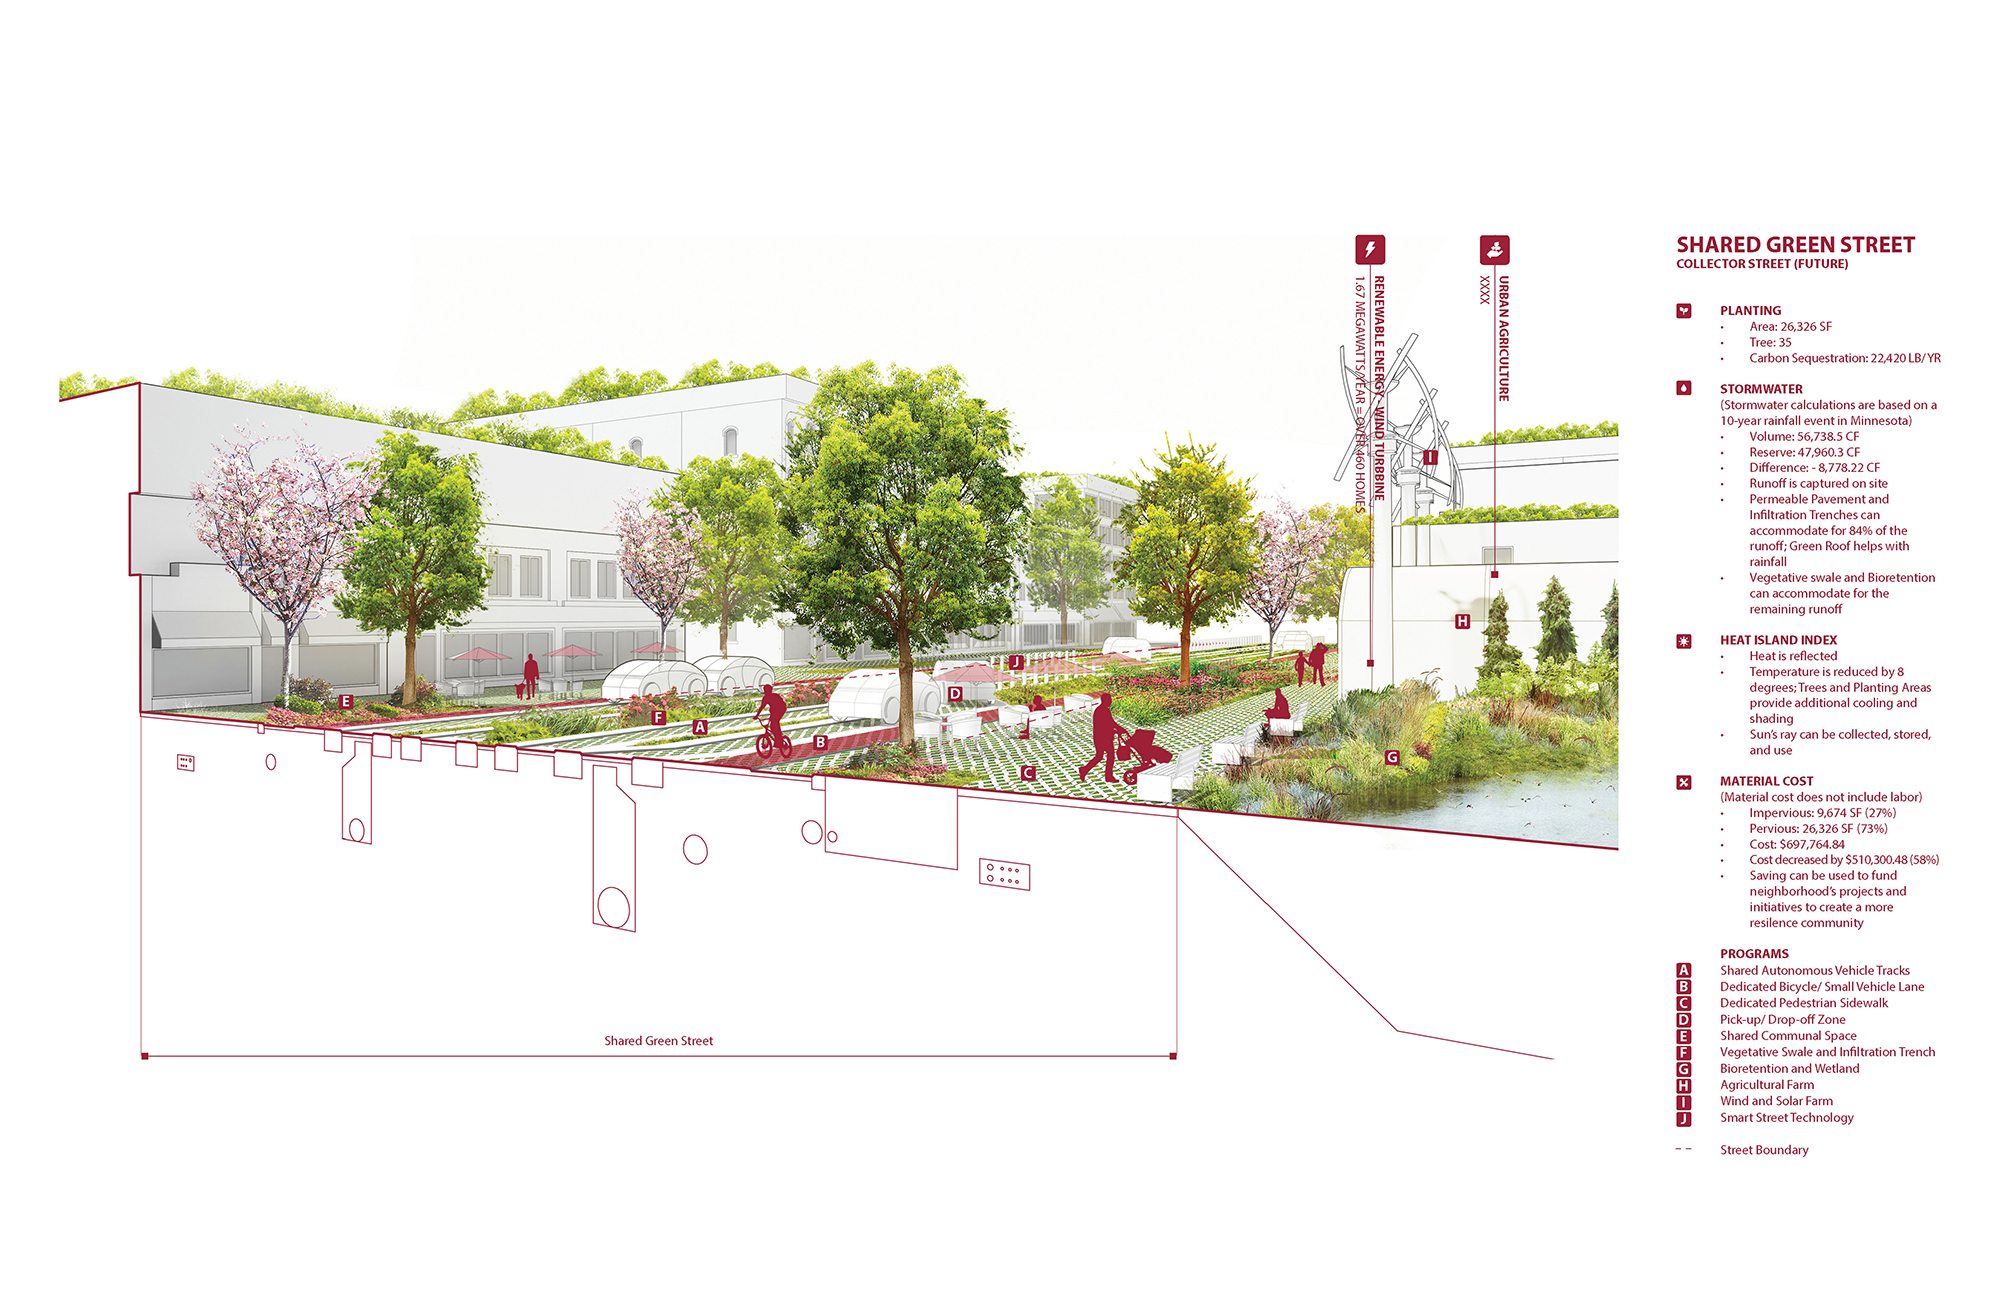 drawing of formerly paved road that is now covered in greenery with a small area for cars